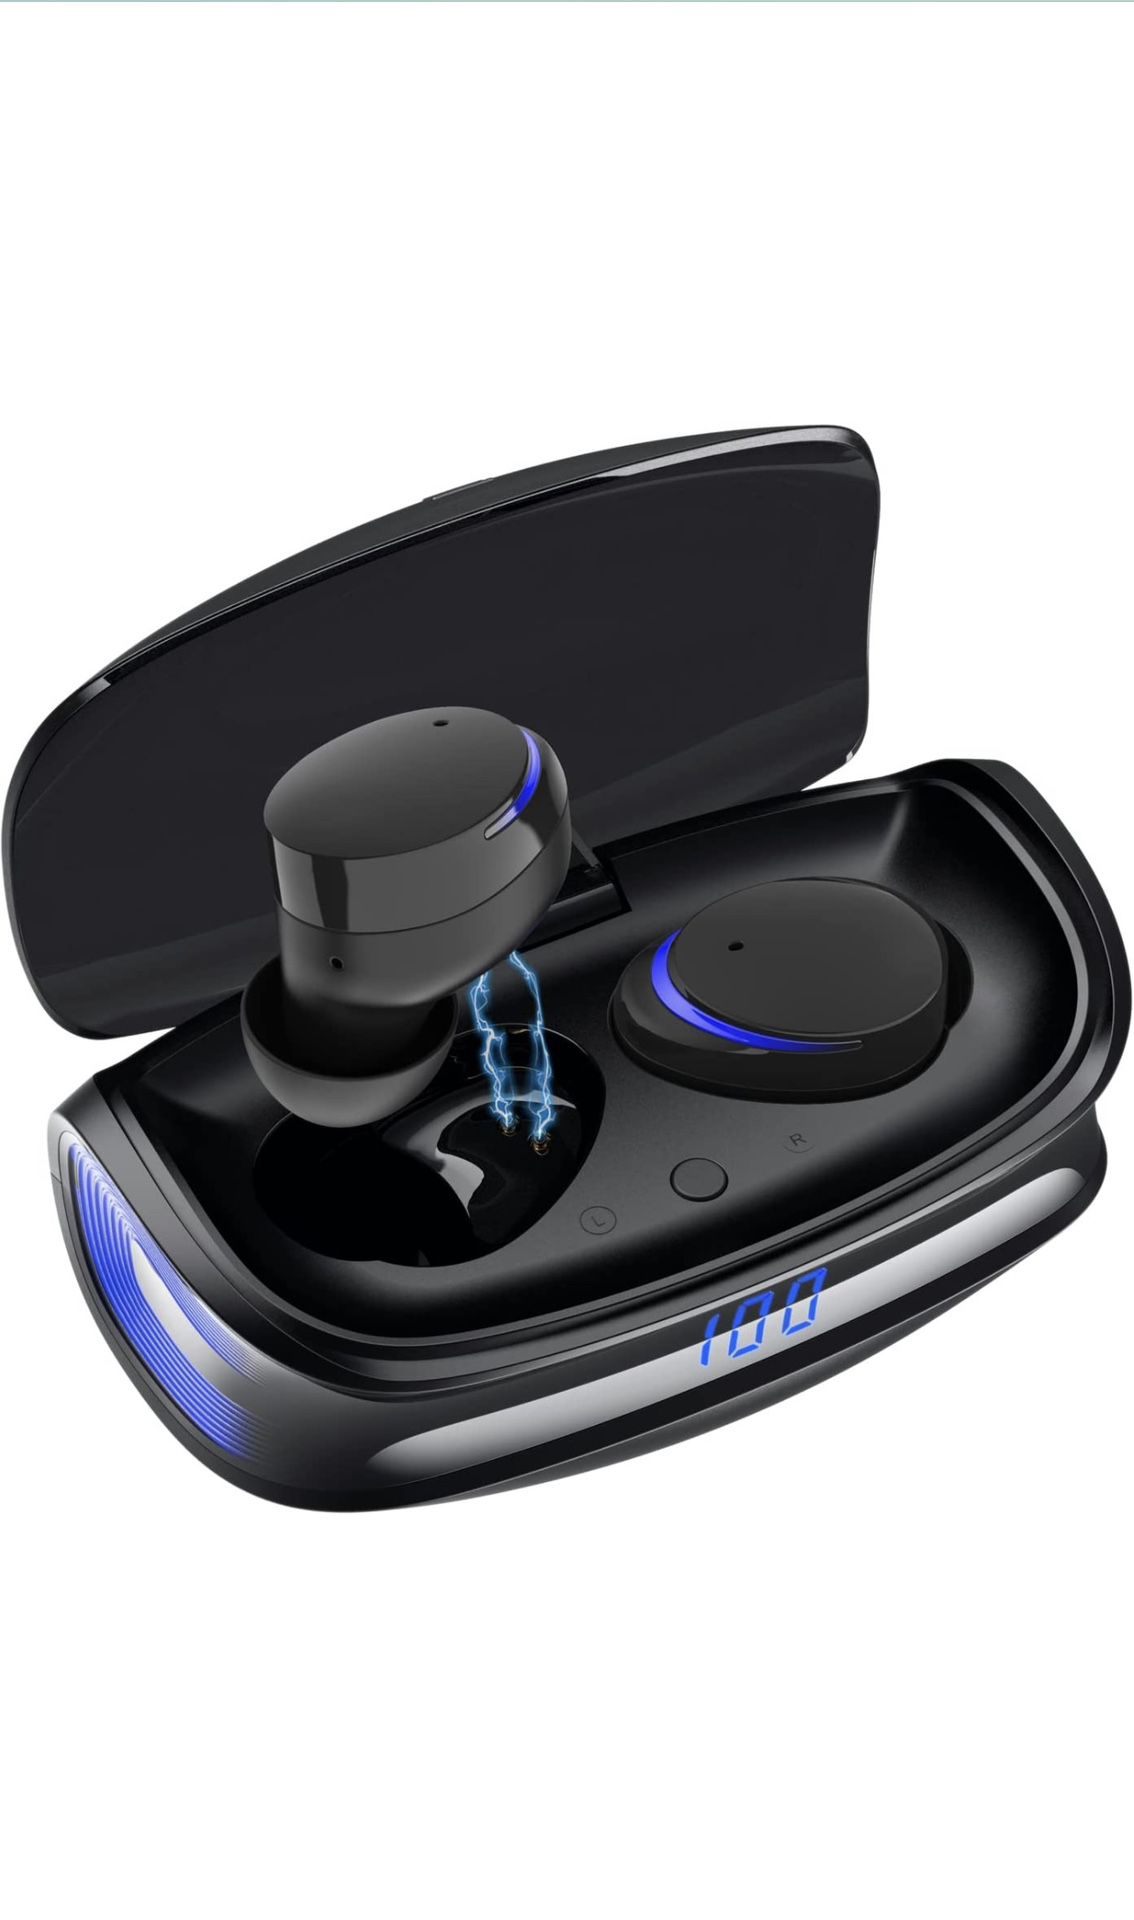 Wireless Earbuds, Bluetooth 5.0 Headphones with LED Charging Case, in Ear Headset IPX8 Waterproof Earbuds High-Fidelity Stereo Sound, Built-in Mic for